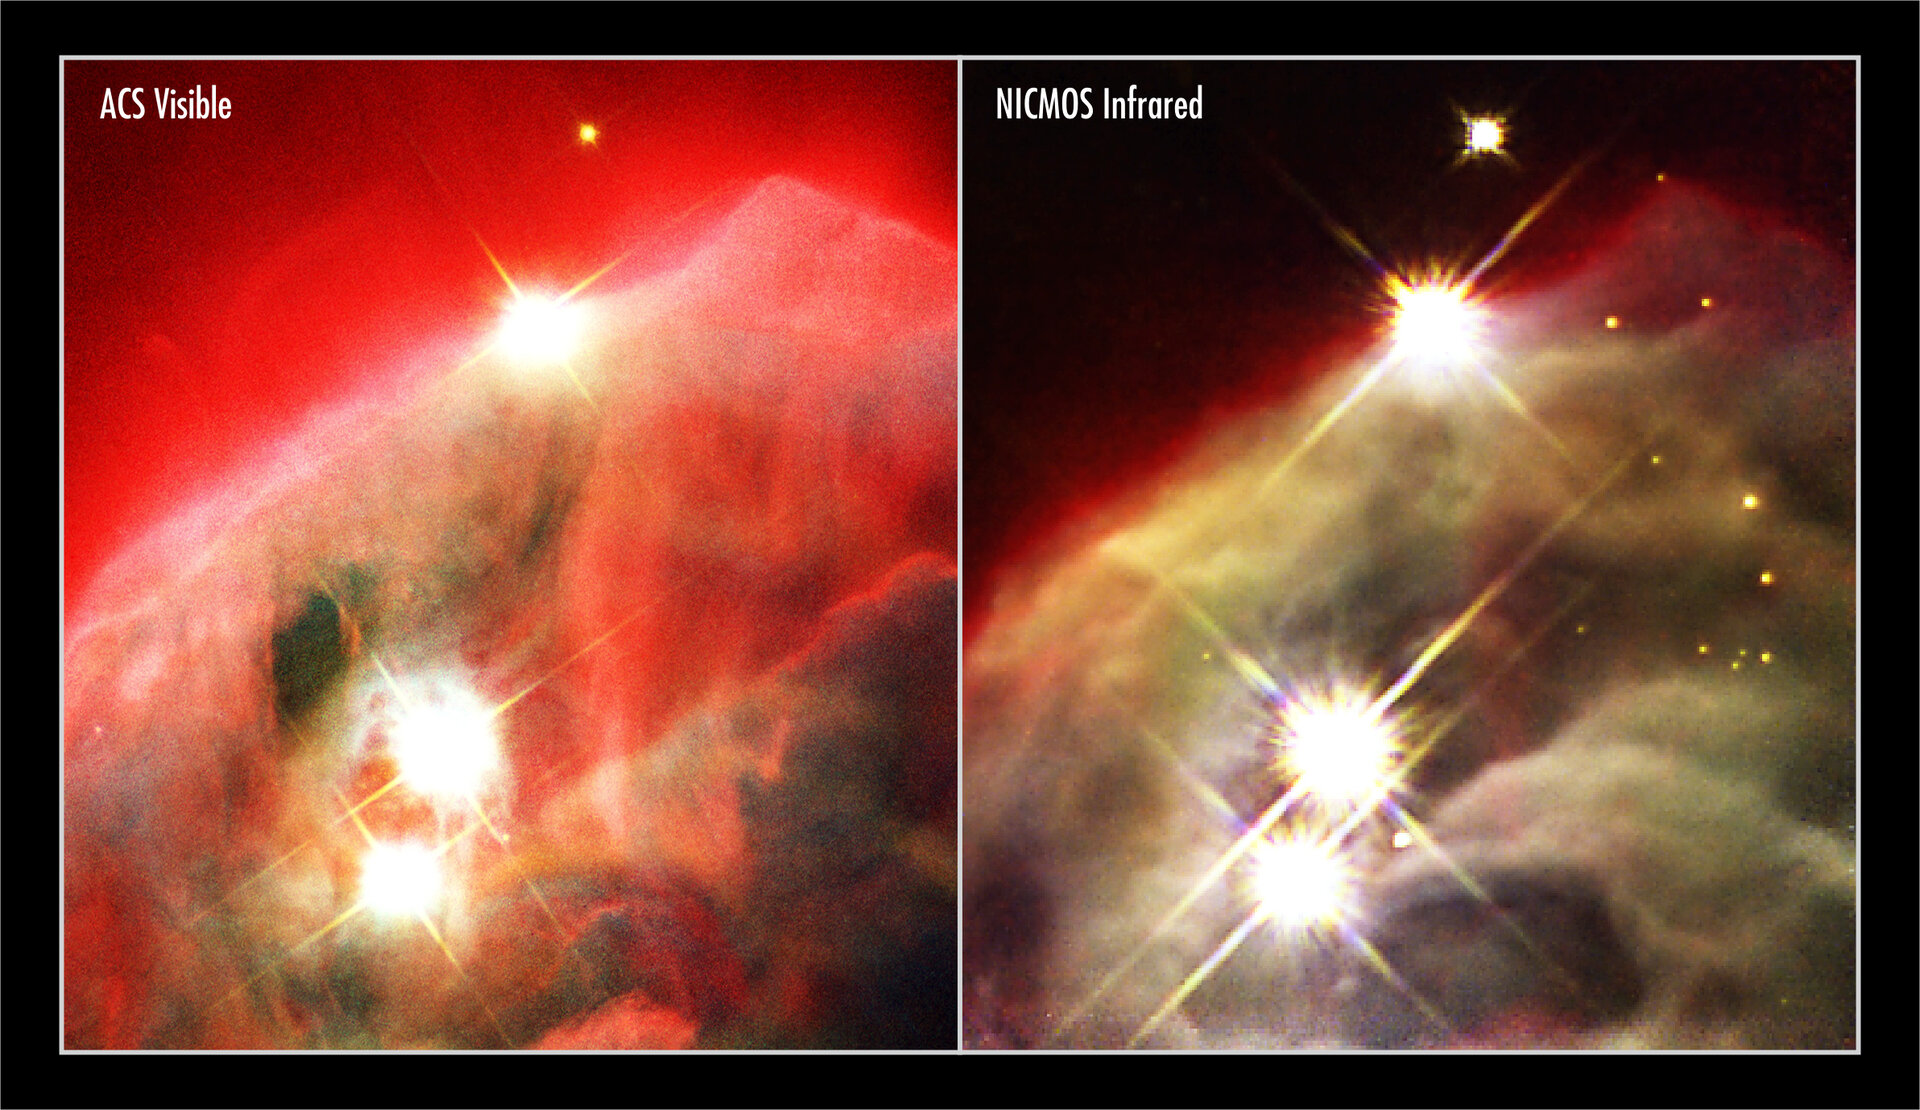 NICMOS uncovers dust layers to show inner region of dusty nebula